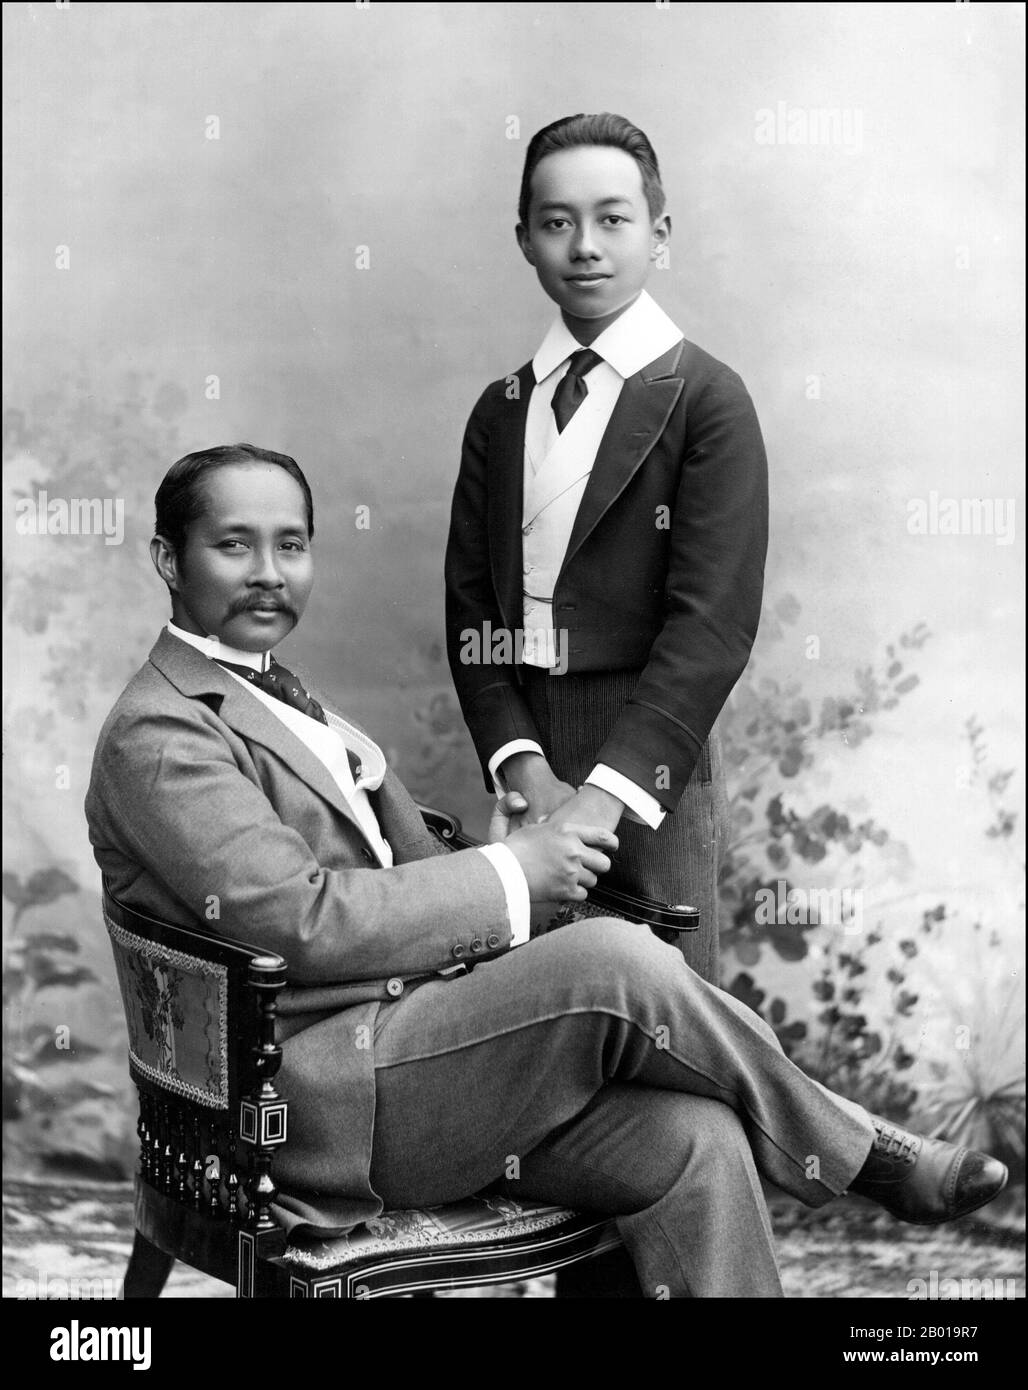 Thailand: King Chulalongkorn (20 September 1853 – 23 October 1910) of Siam with the Crown Prince, c. 1890  Phra Bat Somdet Phra Poramintharamaha Chulalongkorn Phra Chunla Chom Klao Chao Yu Hua, or Rama V, was the fifth monarch of Siam under the House of Chakri.  He is considered one of the greatest kings of Siam. His reign was characterised by the modernisation of Siam, immense government and social reforms, and territorial cessions to the British Empire and French Indochina.   He is seen here with the Crown Prince, the future King Vajiravudh (1881-1925). Stock Photo